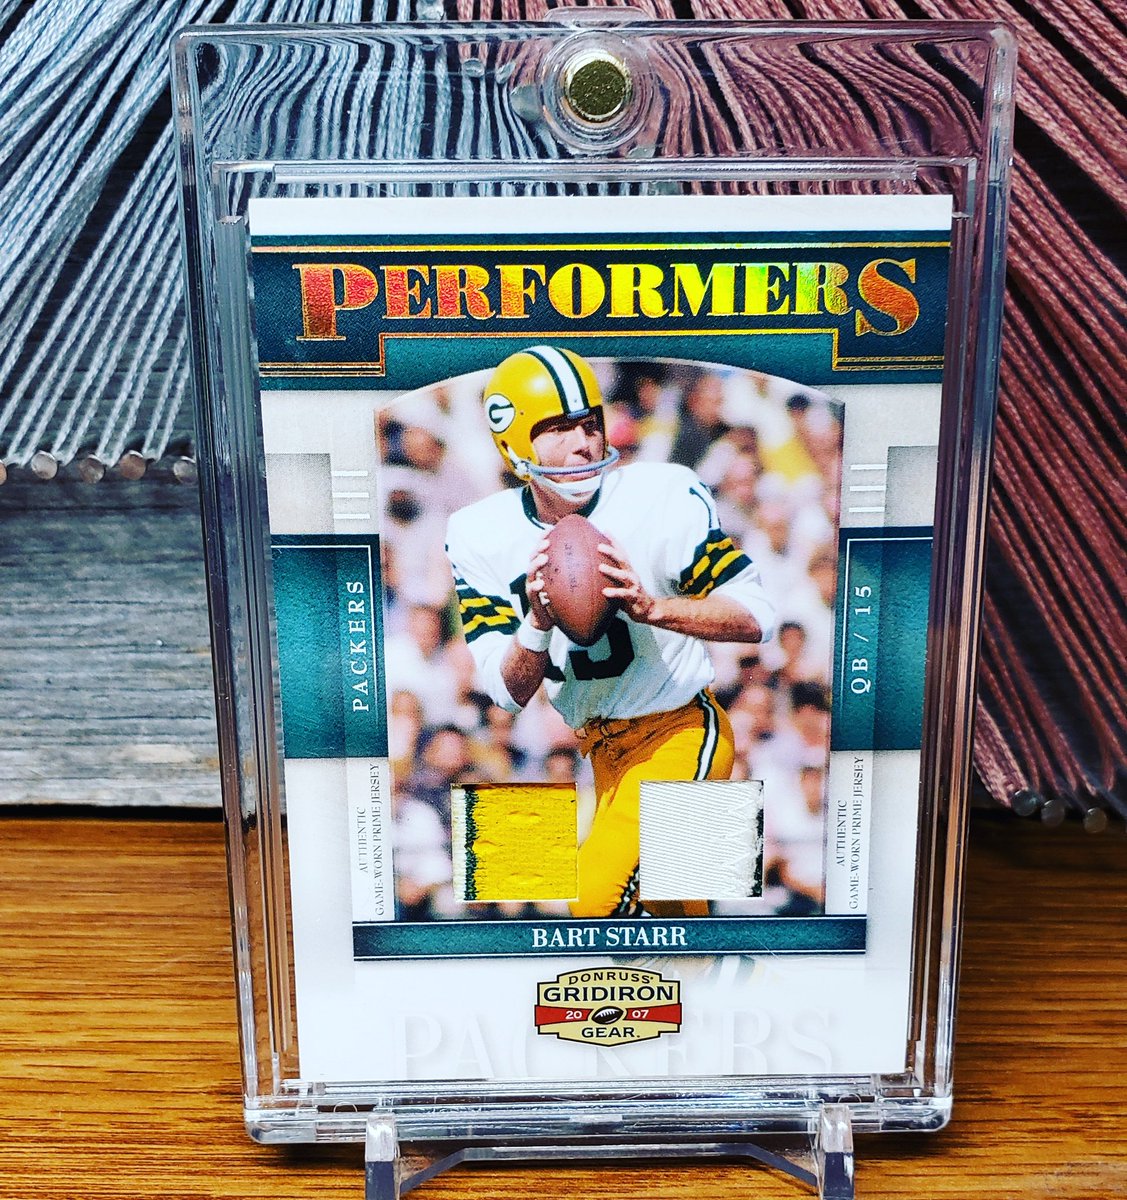 From the PC - 2007 Gridiron Gear Bart Starr Game Worn Prime Jersey #/50. 
#bartstarr #gridirongear #greenbaypackers #halloffame #gameusedjersey #gameworn #thehobby #whodoyoucollect #footballcards